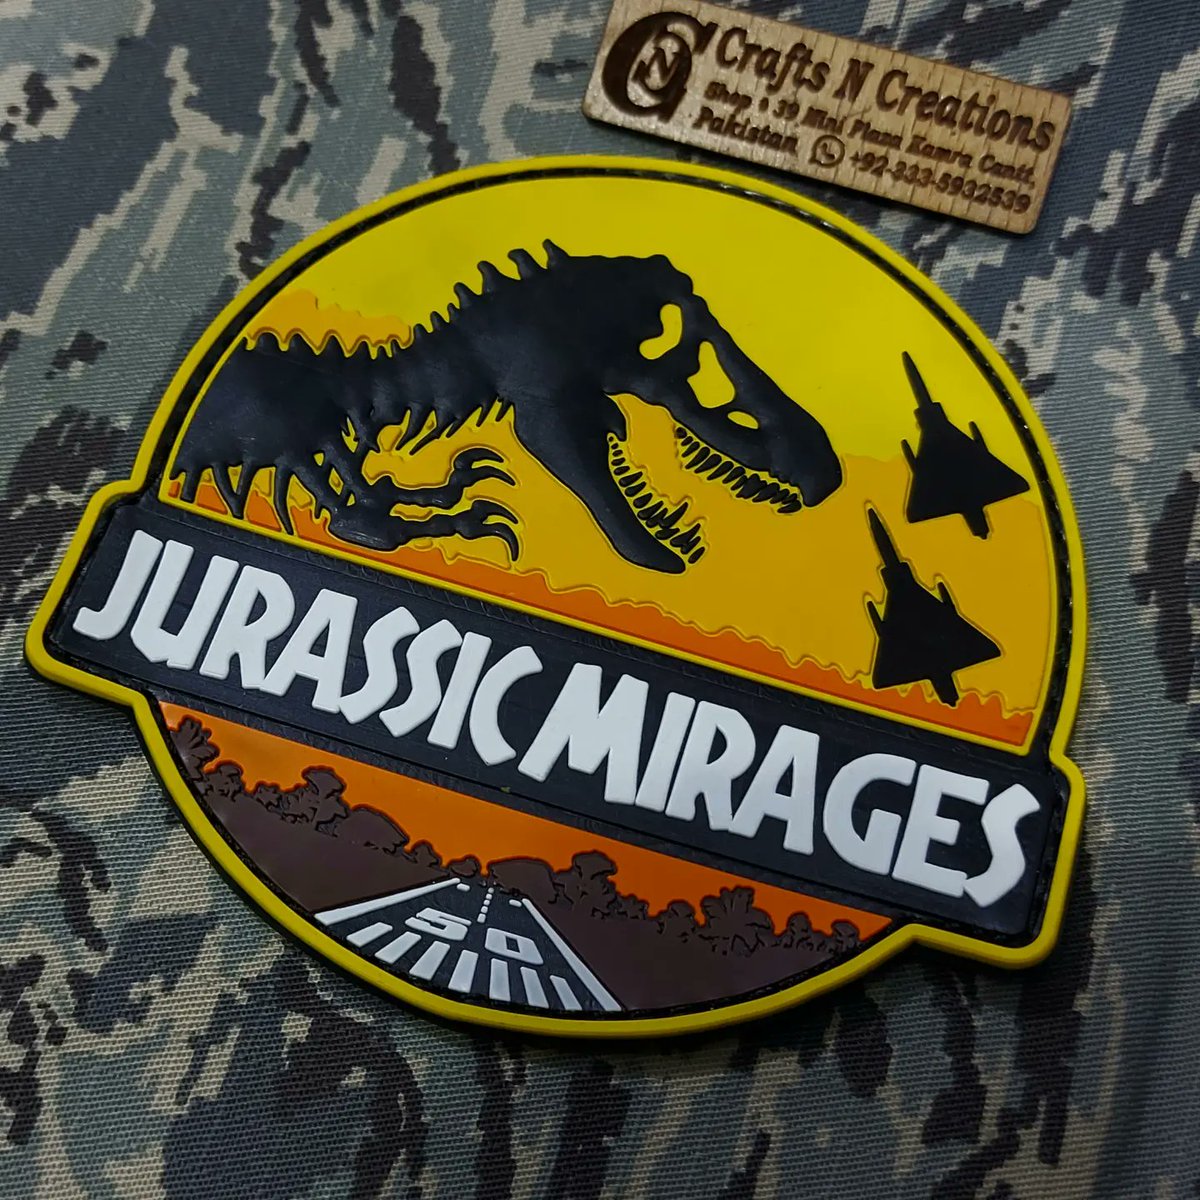 Jurassic Mirages Patches available....
For order inbox please...
#Pakairforce #patches #airforcepatches #militarypatches #airforcepatch #patch #patchcollector #military #aviationpatches
#aircraft #PAF #custompatches #pvcpatchesmaker #pvcpatches #patchwork #Patchmaker